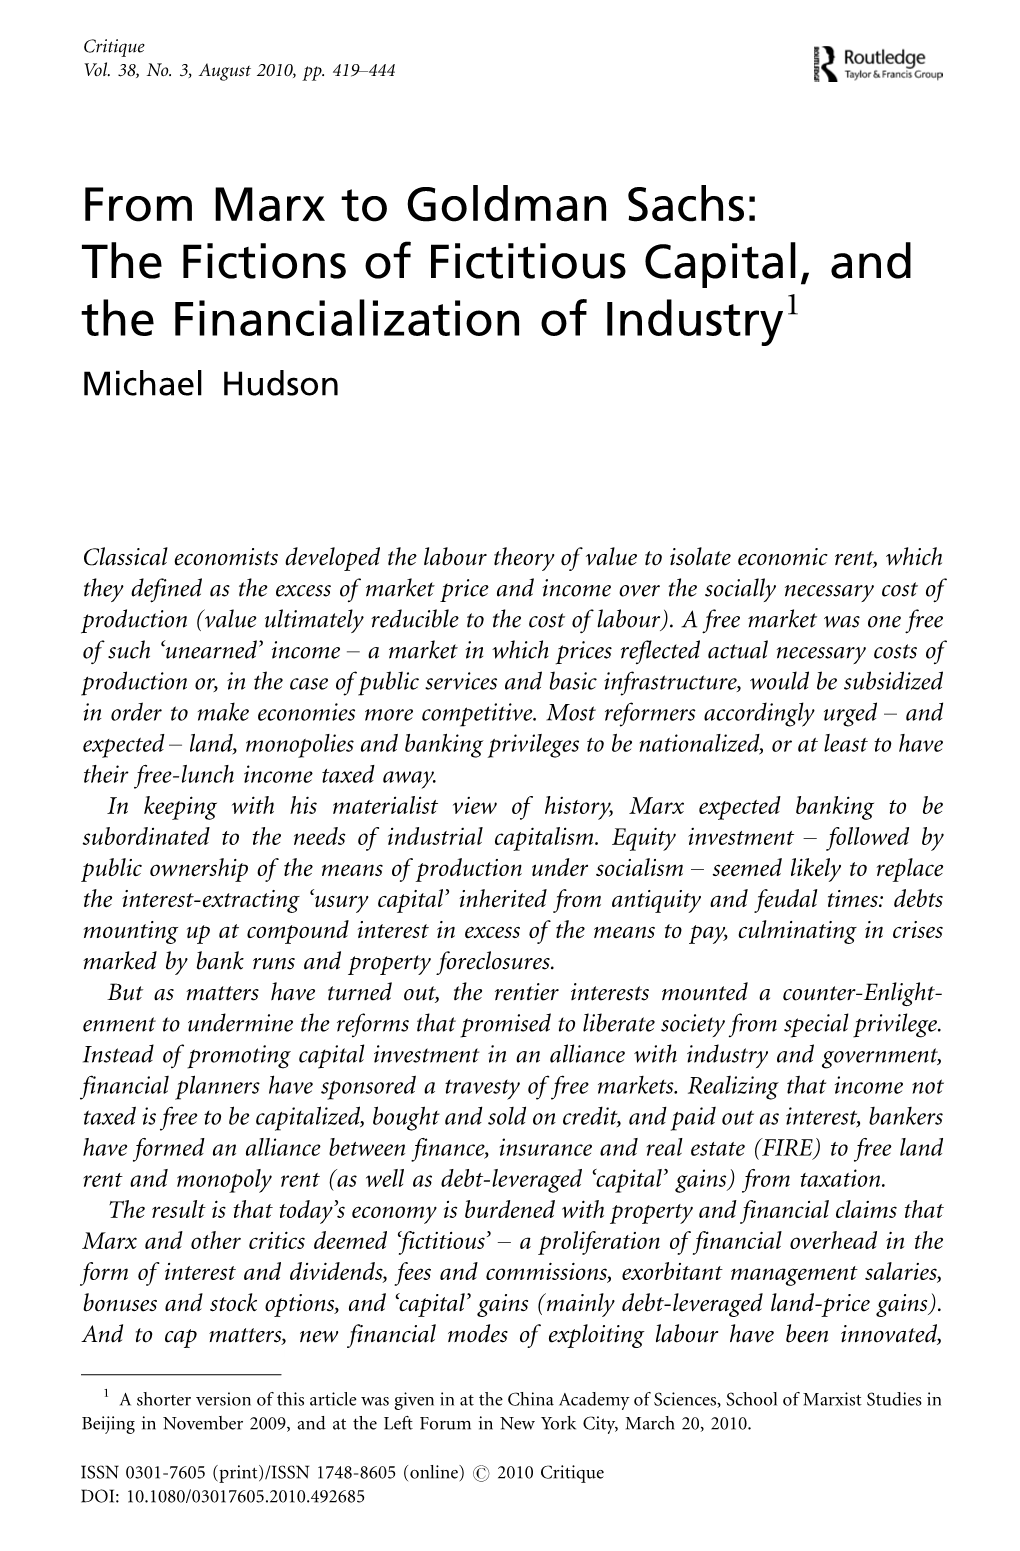 From Marx to Goldman Sachs: the Fictions of Fictitious Capital, and the Financialization of Industry1 Michael Hudson